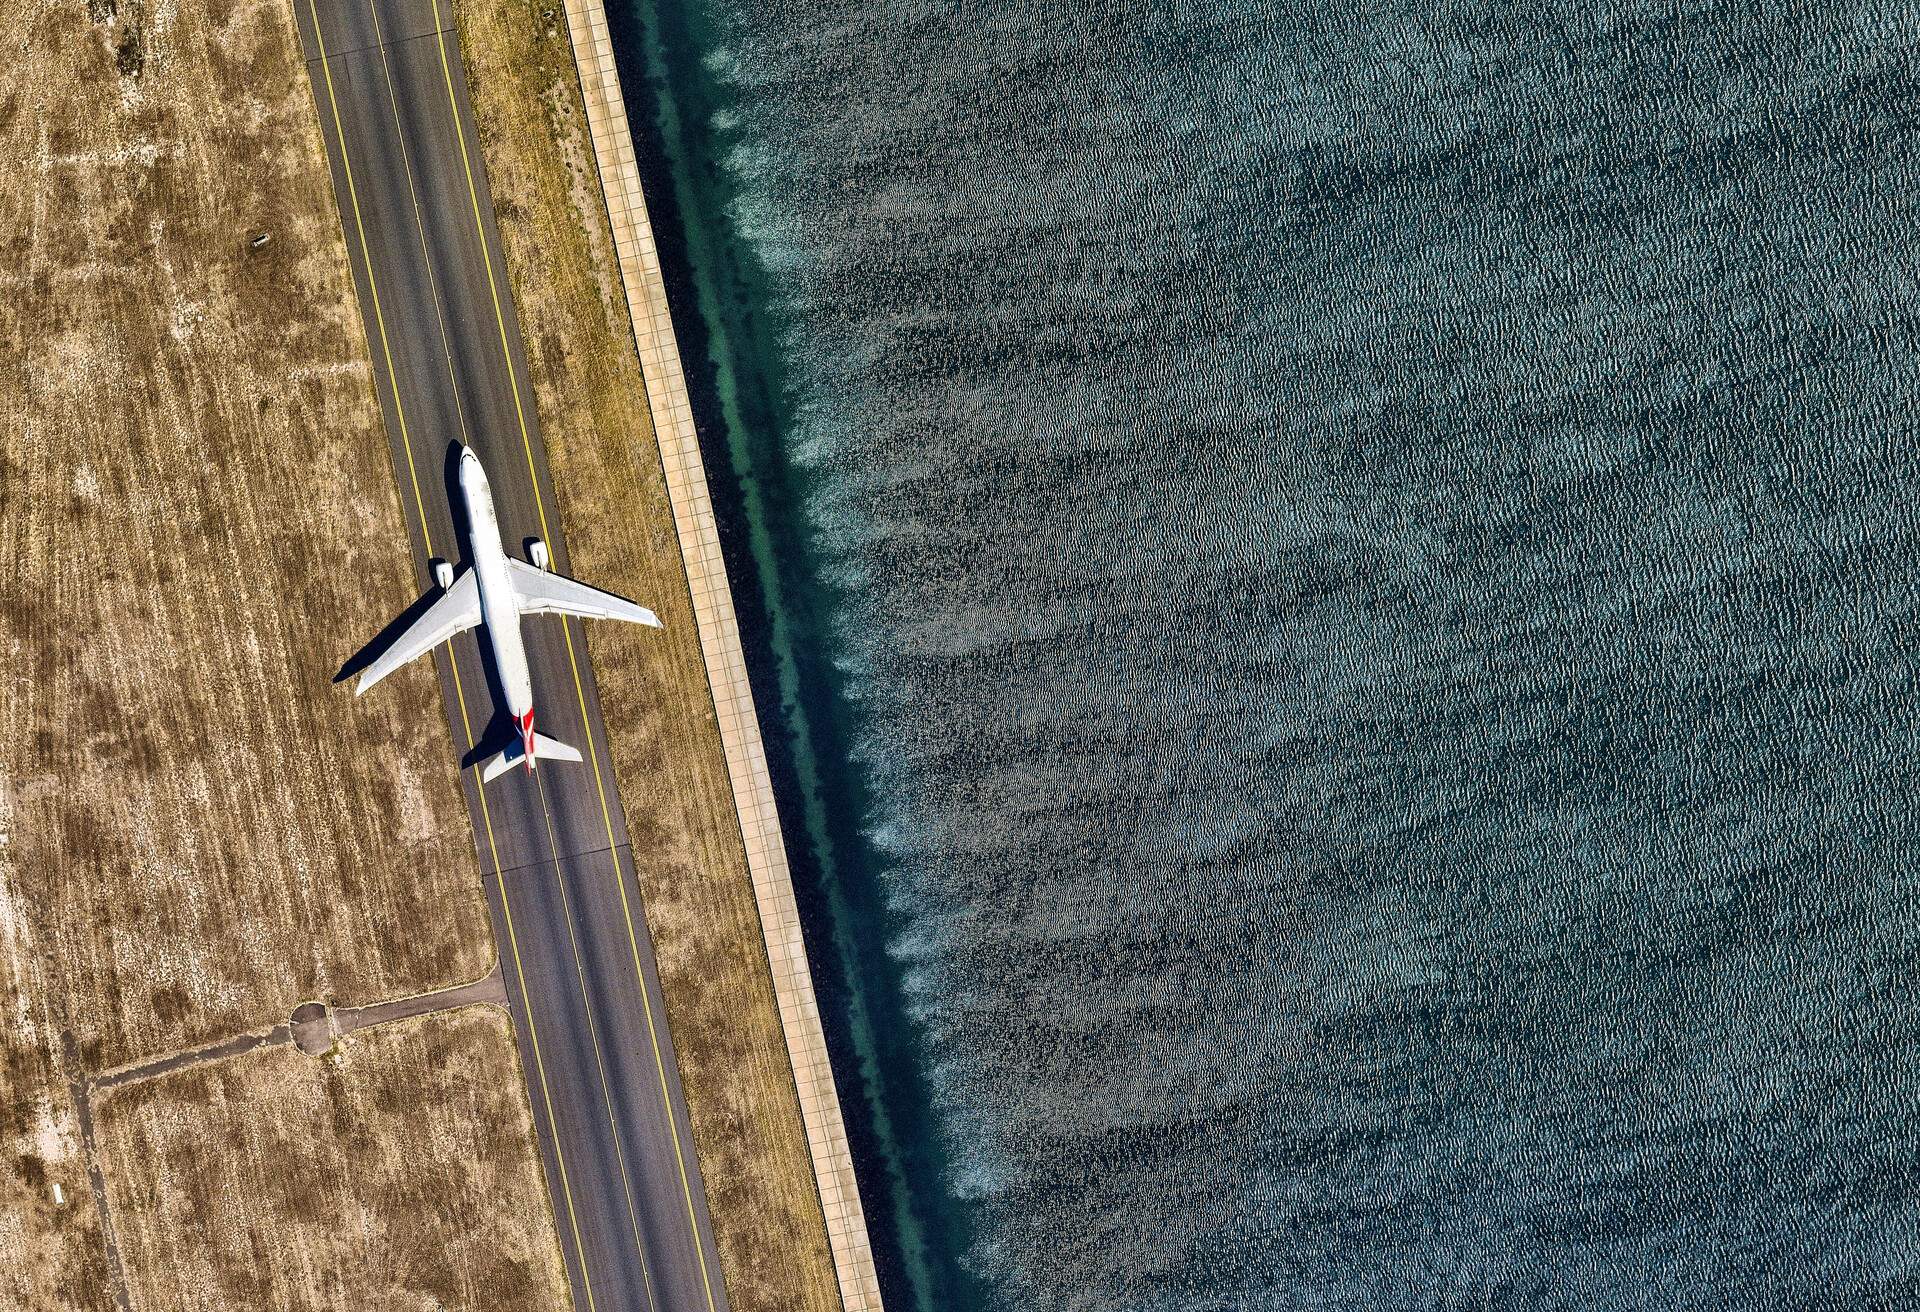 A white airplane on the runway alongside the ocean.